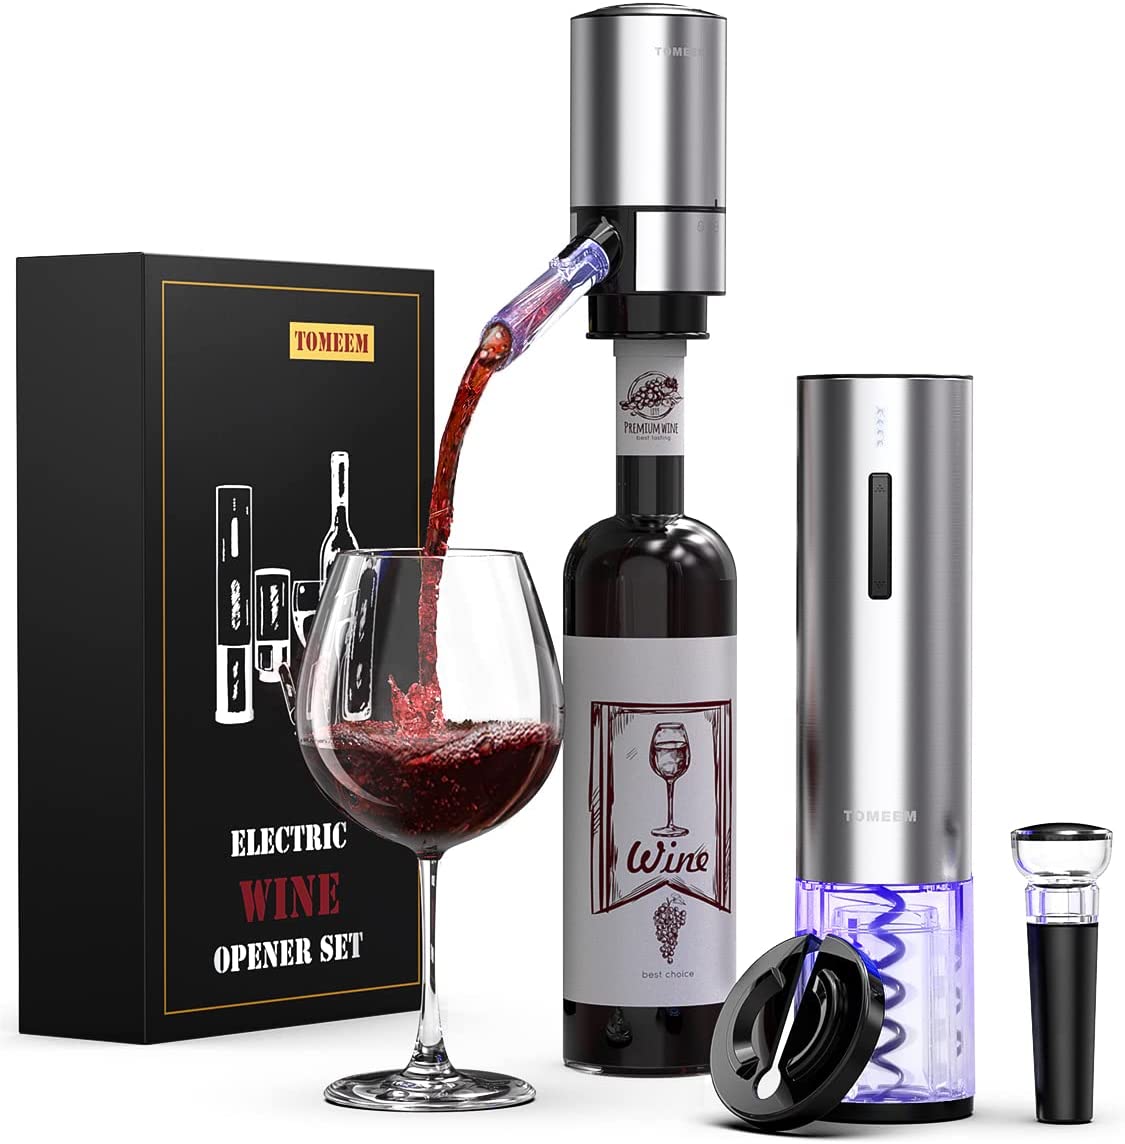 Electric Wine Opener Set, Wine Gift Set with Rechargeable Wine Opener, Electric Wine Aerator, Vacuum Stoppers and Foil Cutter, 4-in-1 Electric Wine Bottle Opener for Home Party Bar Outdoor